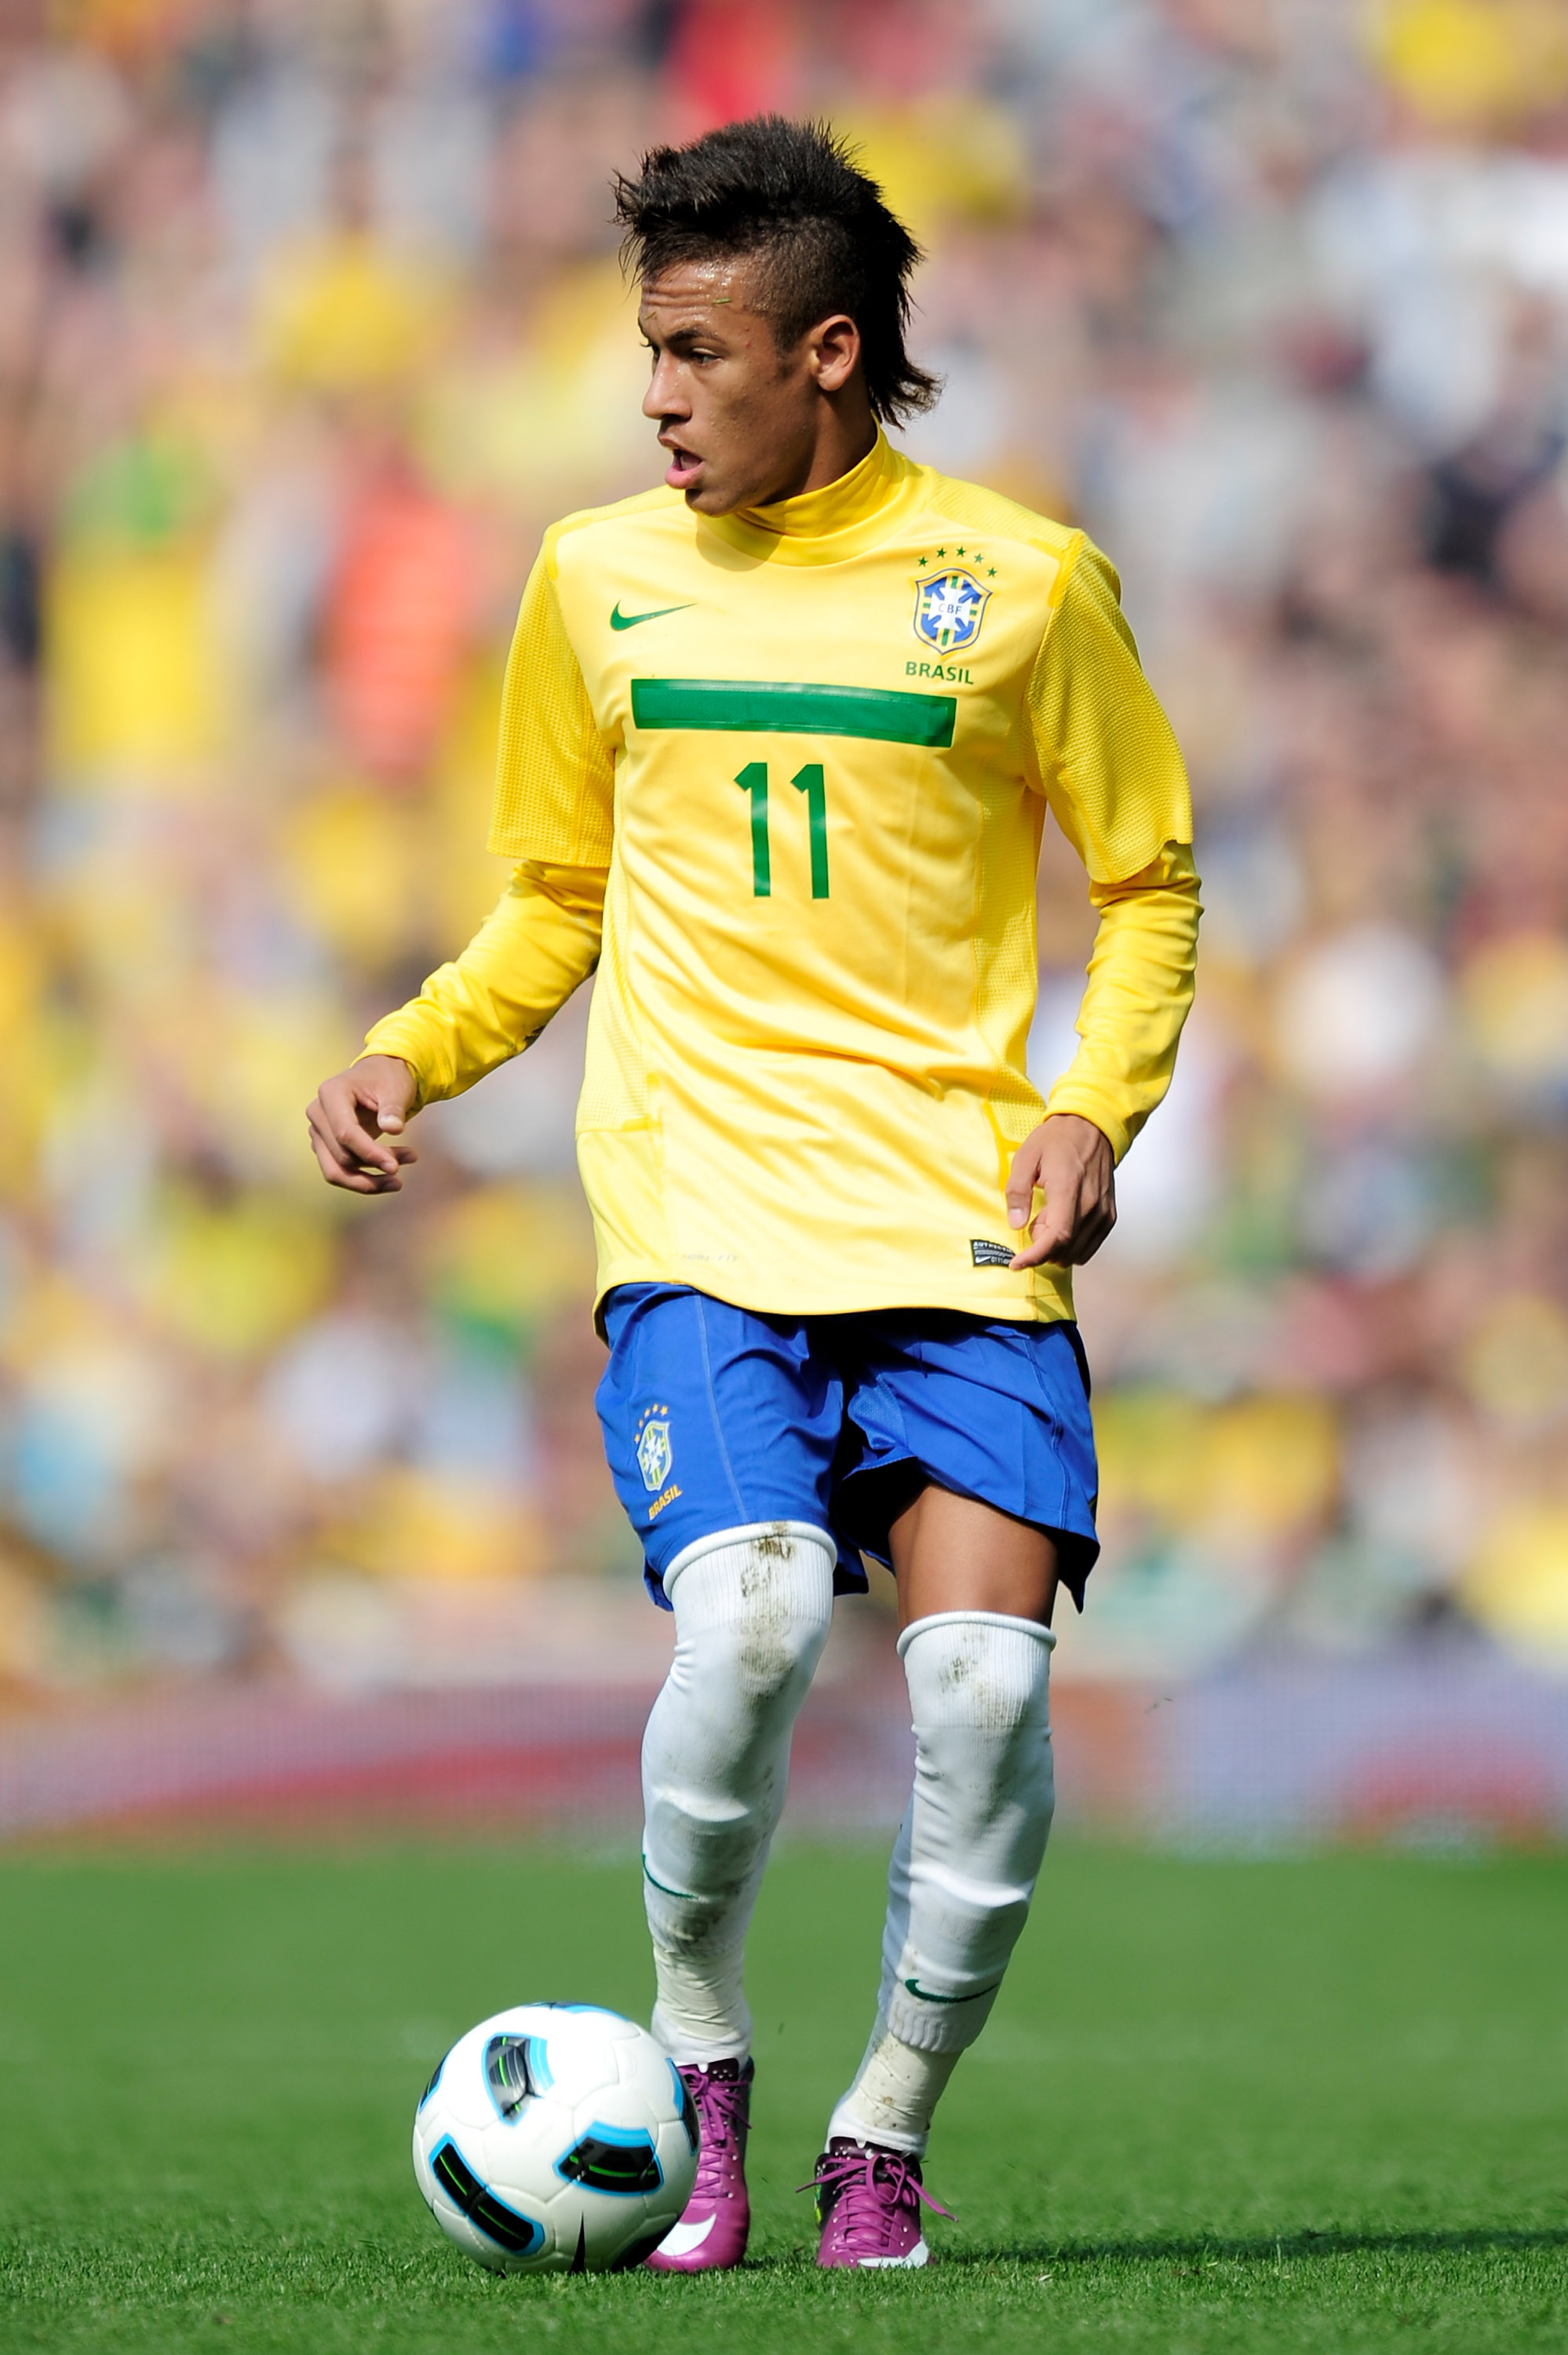 LONDON, ENGLAND - MARCH 27:  Neymar of Brazil on the ball during the International friendly match between Brazil and Scotland at Emirates Stadium on March 27, 2011 in London, England.  (Photo by Jamie McDonald/Getty Images)